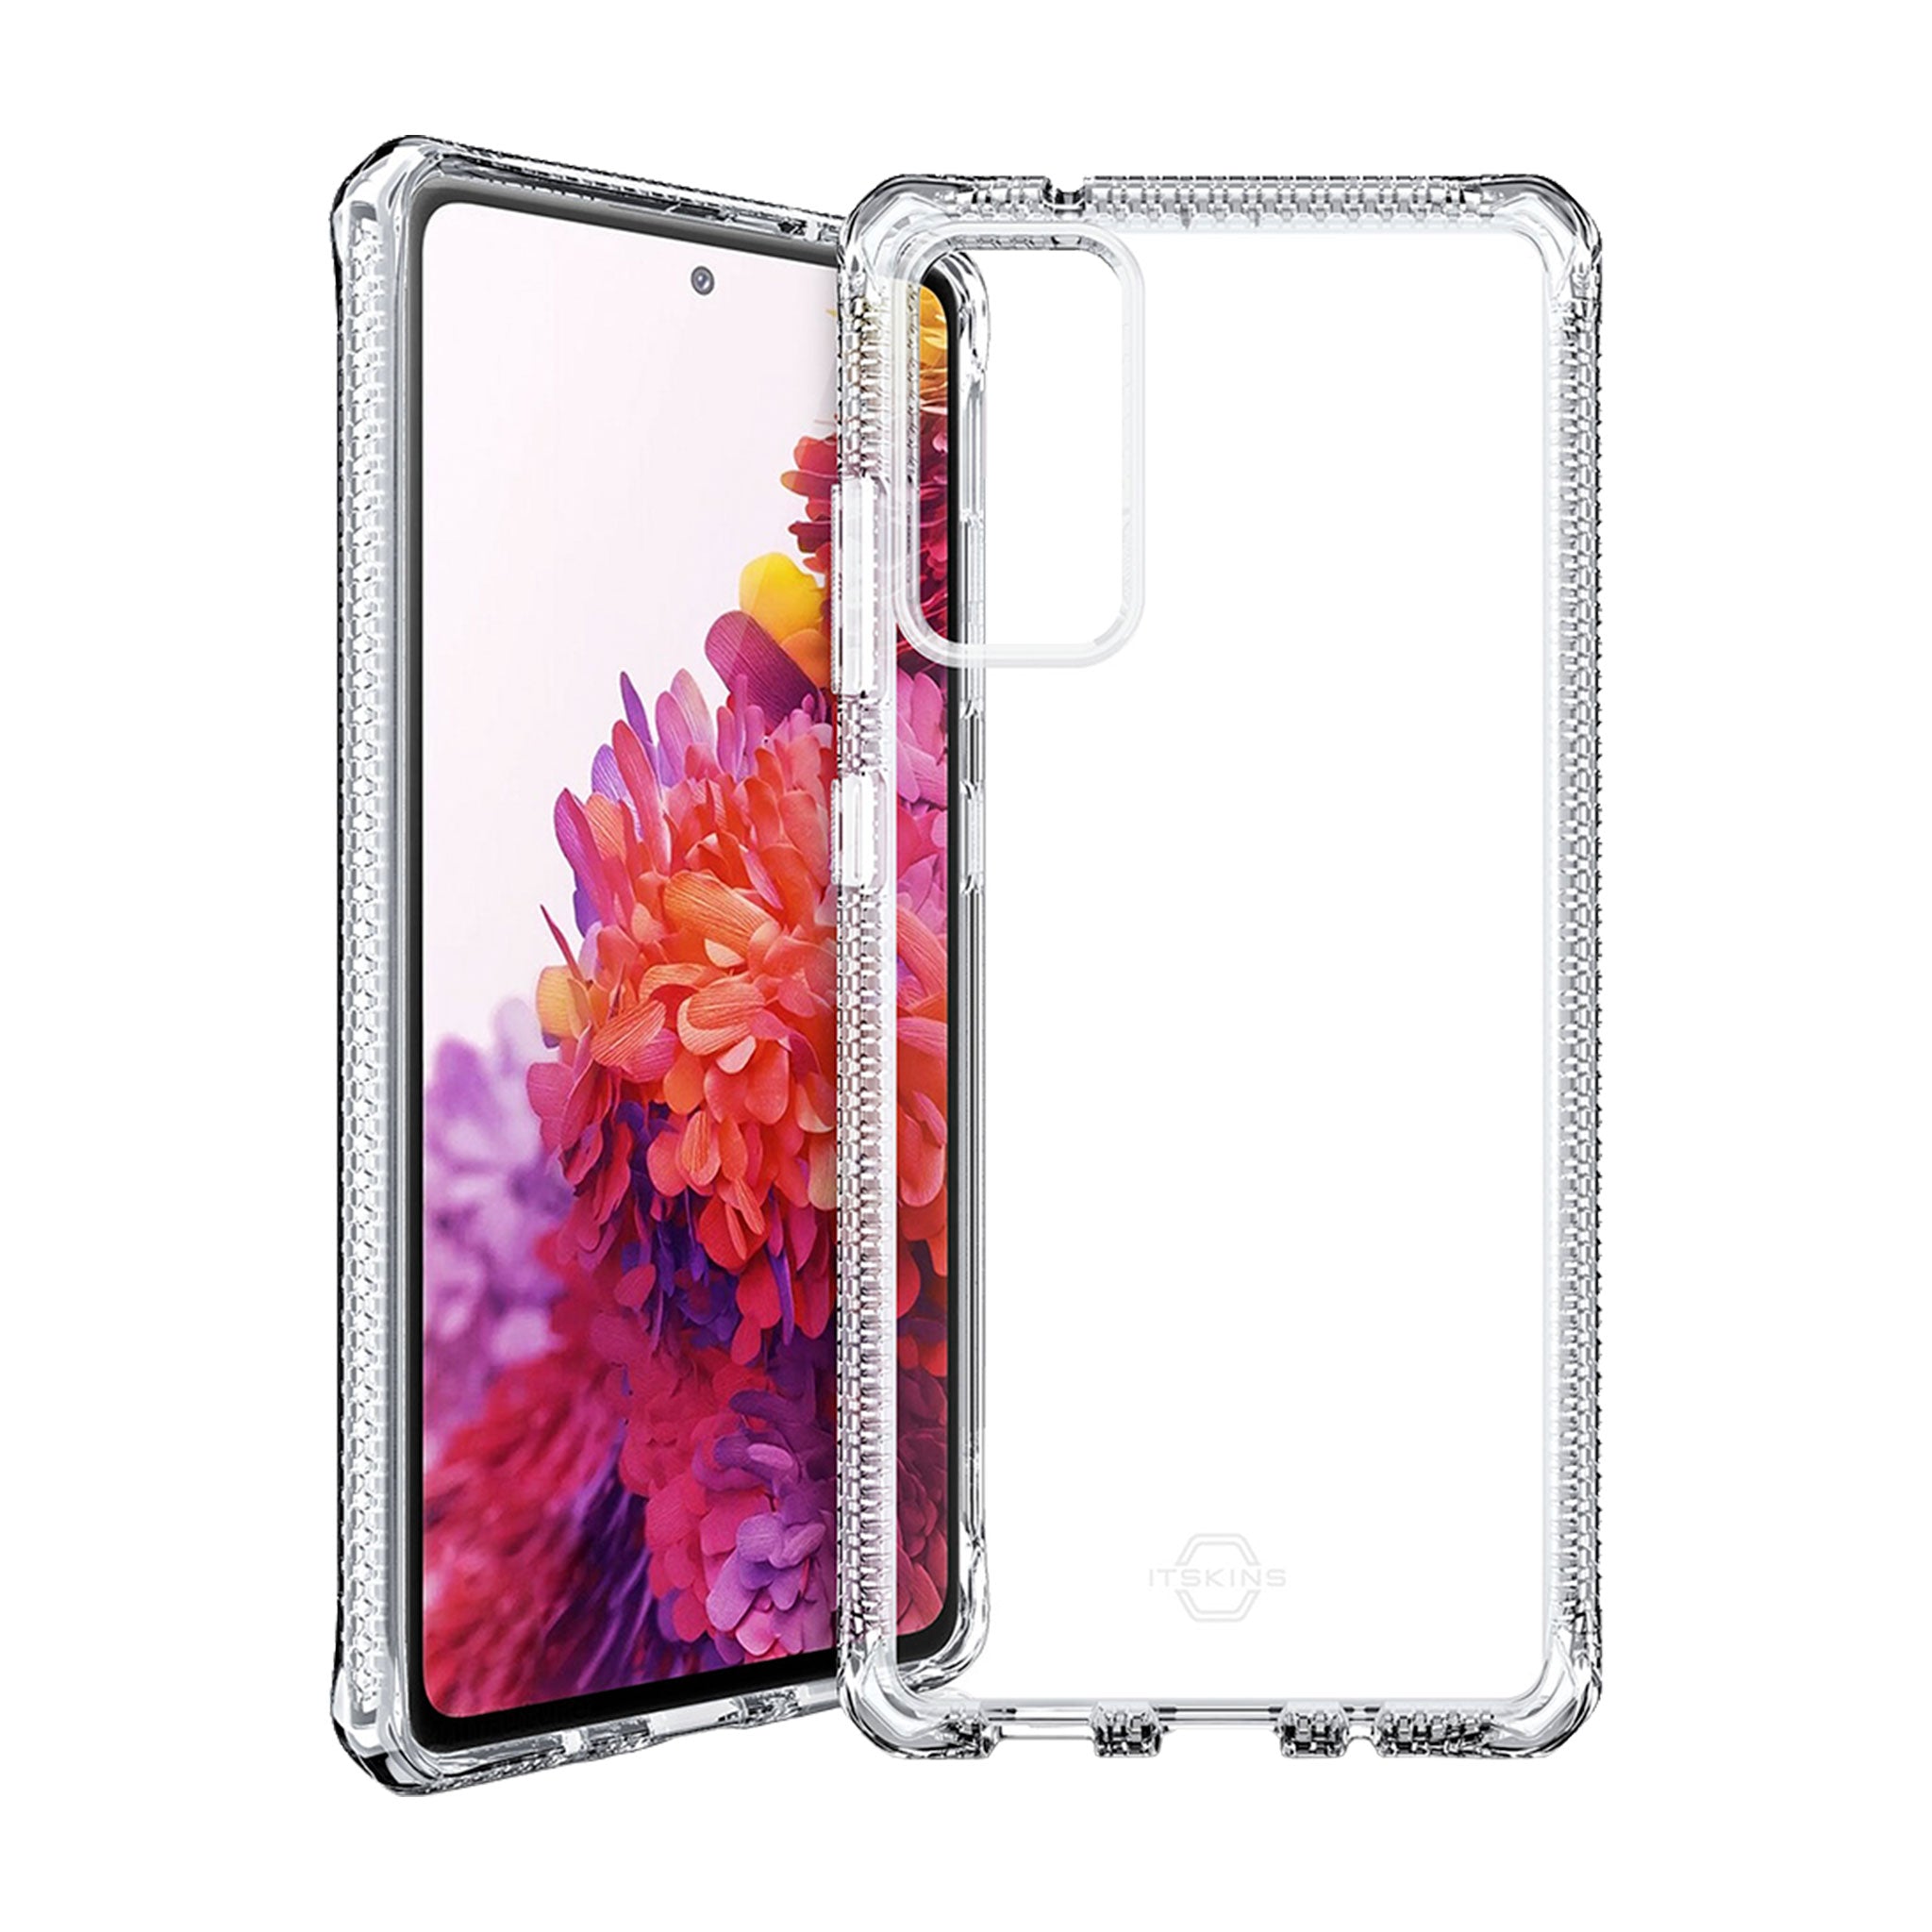 Itskins - Spectrum Clear Case For Samsung Galaxy S20 Fe 5g - Transparent